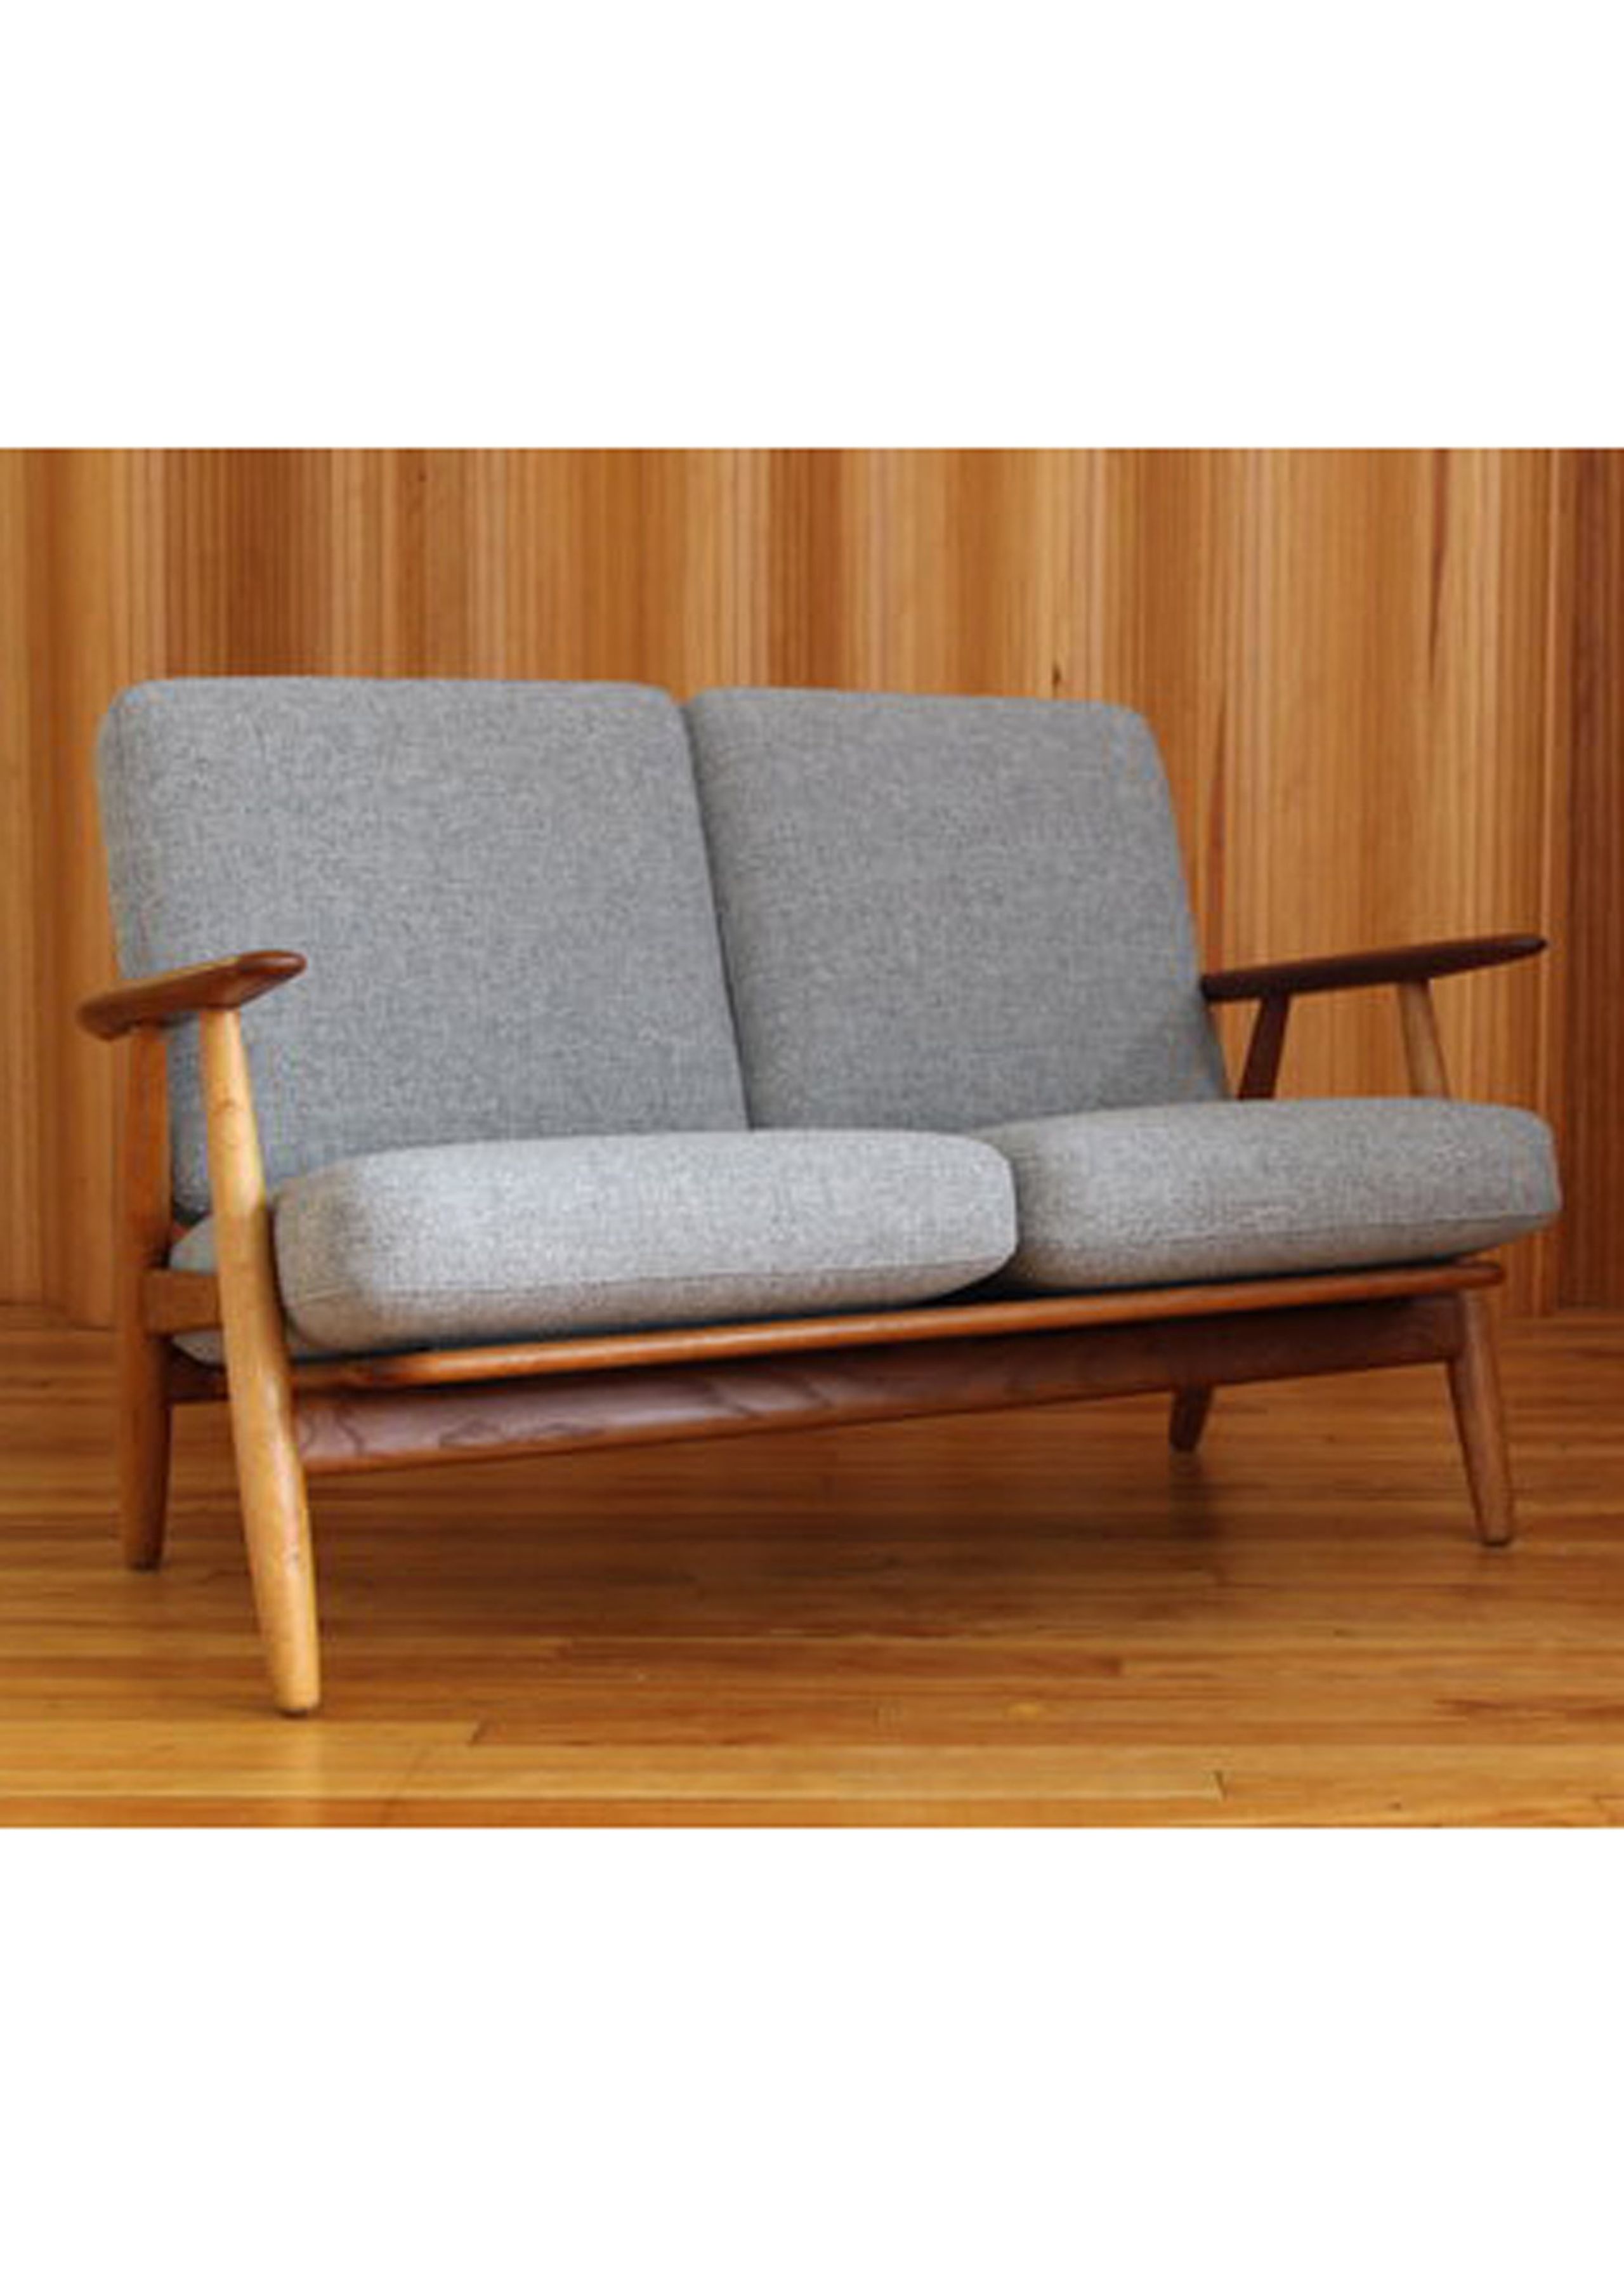 Getama - Canapé - GE240 / The Cigar Couch / 2 seater / by Hans J. Wegner - Oak